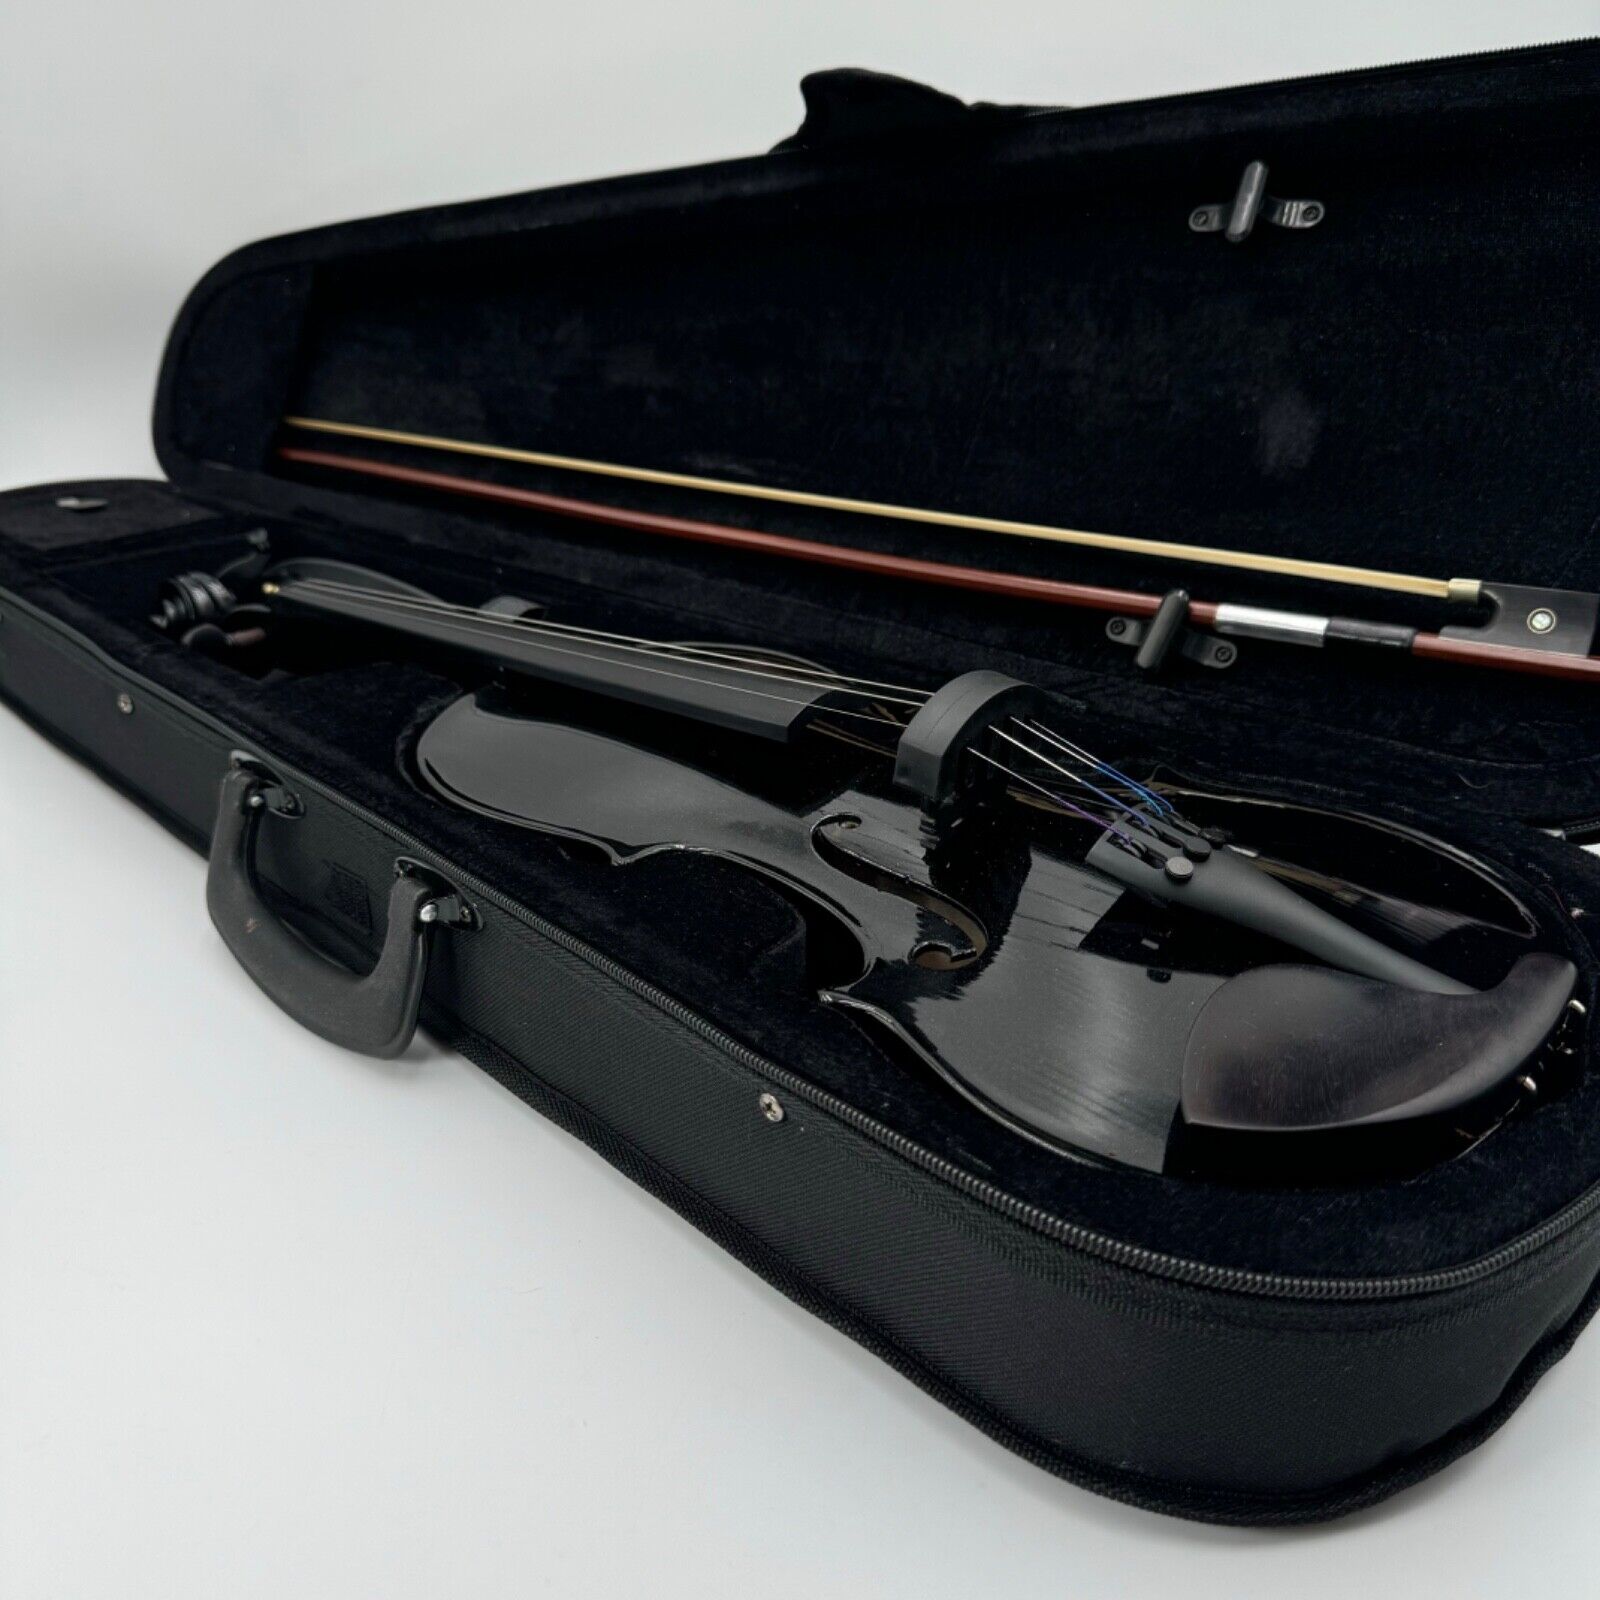 Tower Strings Violin Limited Edition Midnight Black Edition with Case & Accessor